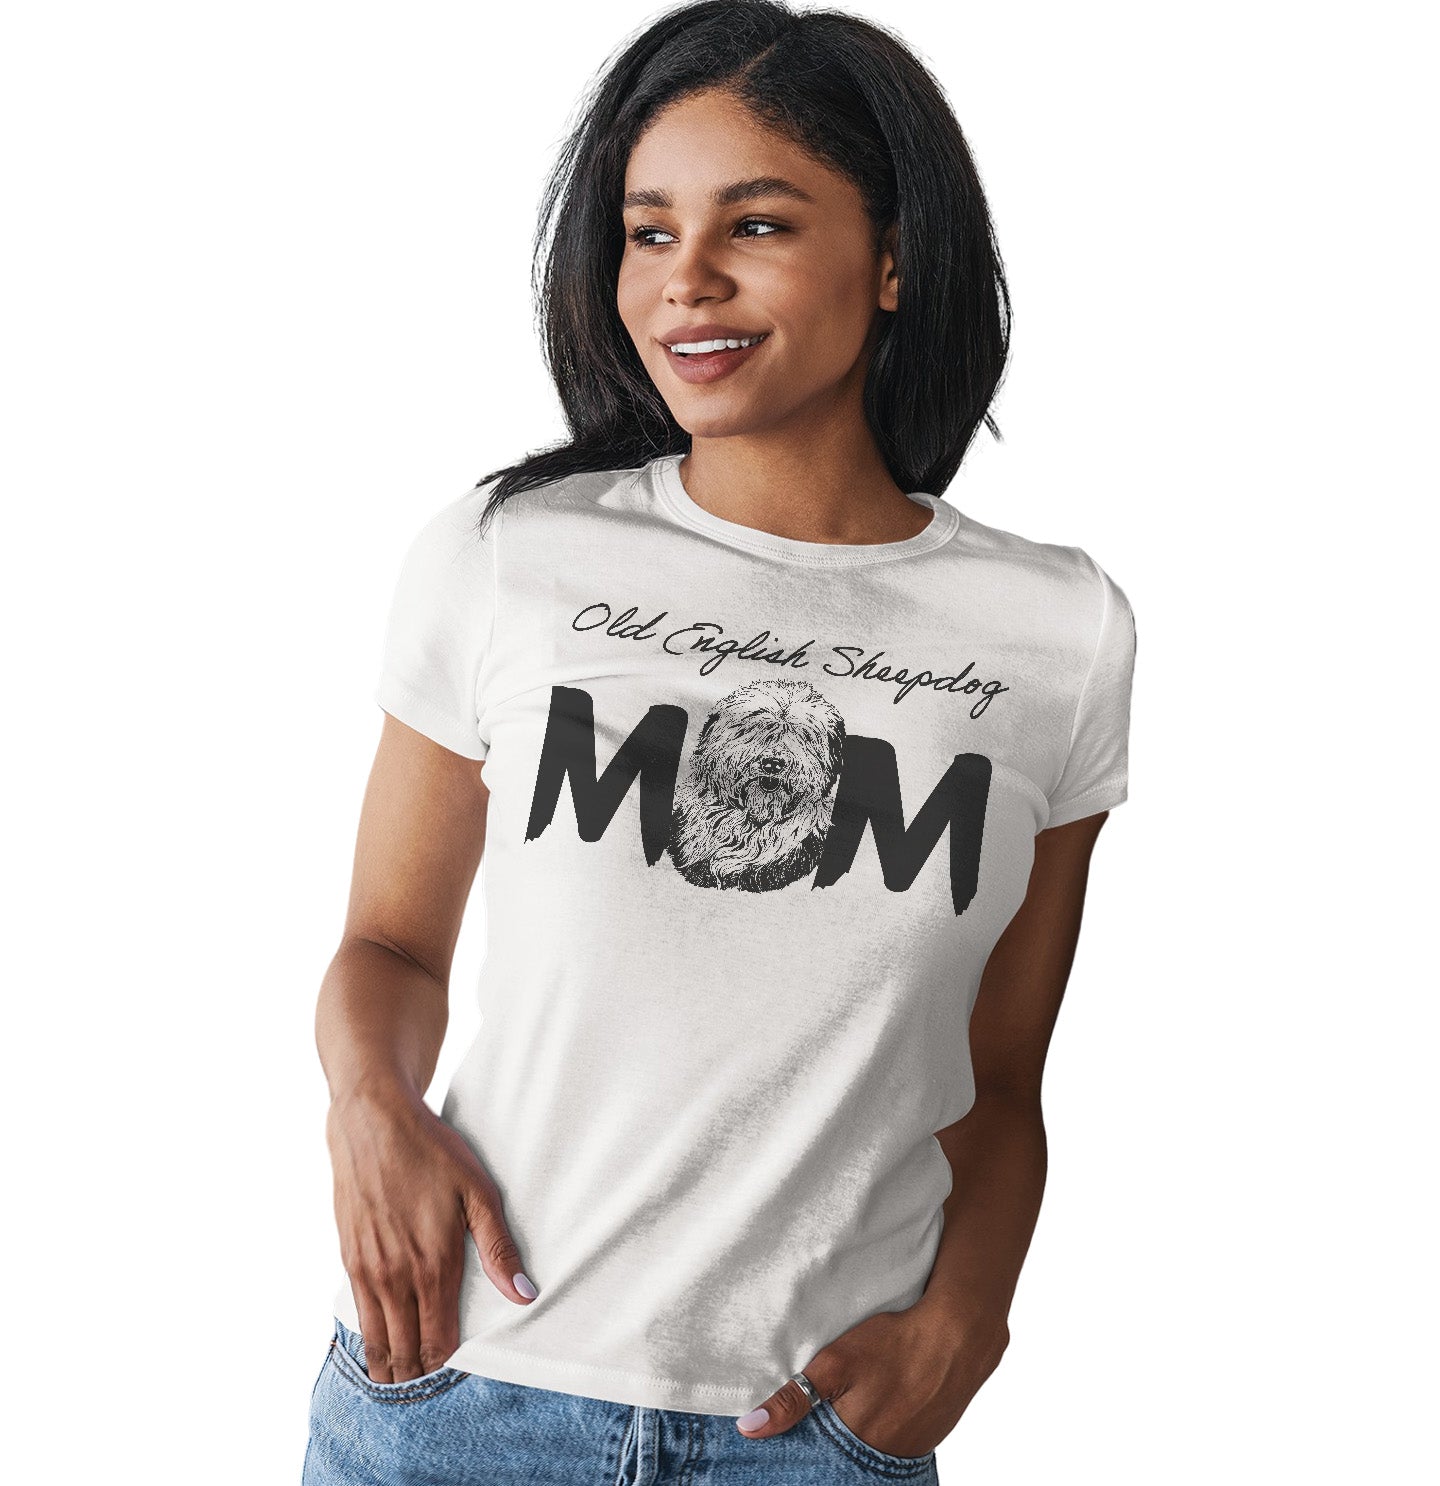 Old English Sheepdog Breed Mom - Women's Fitted T-Shirt